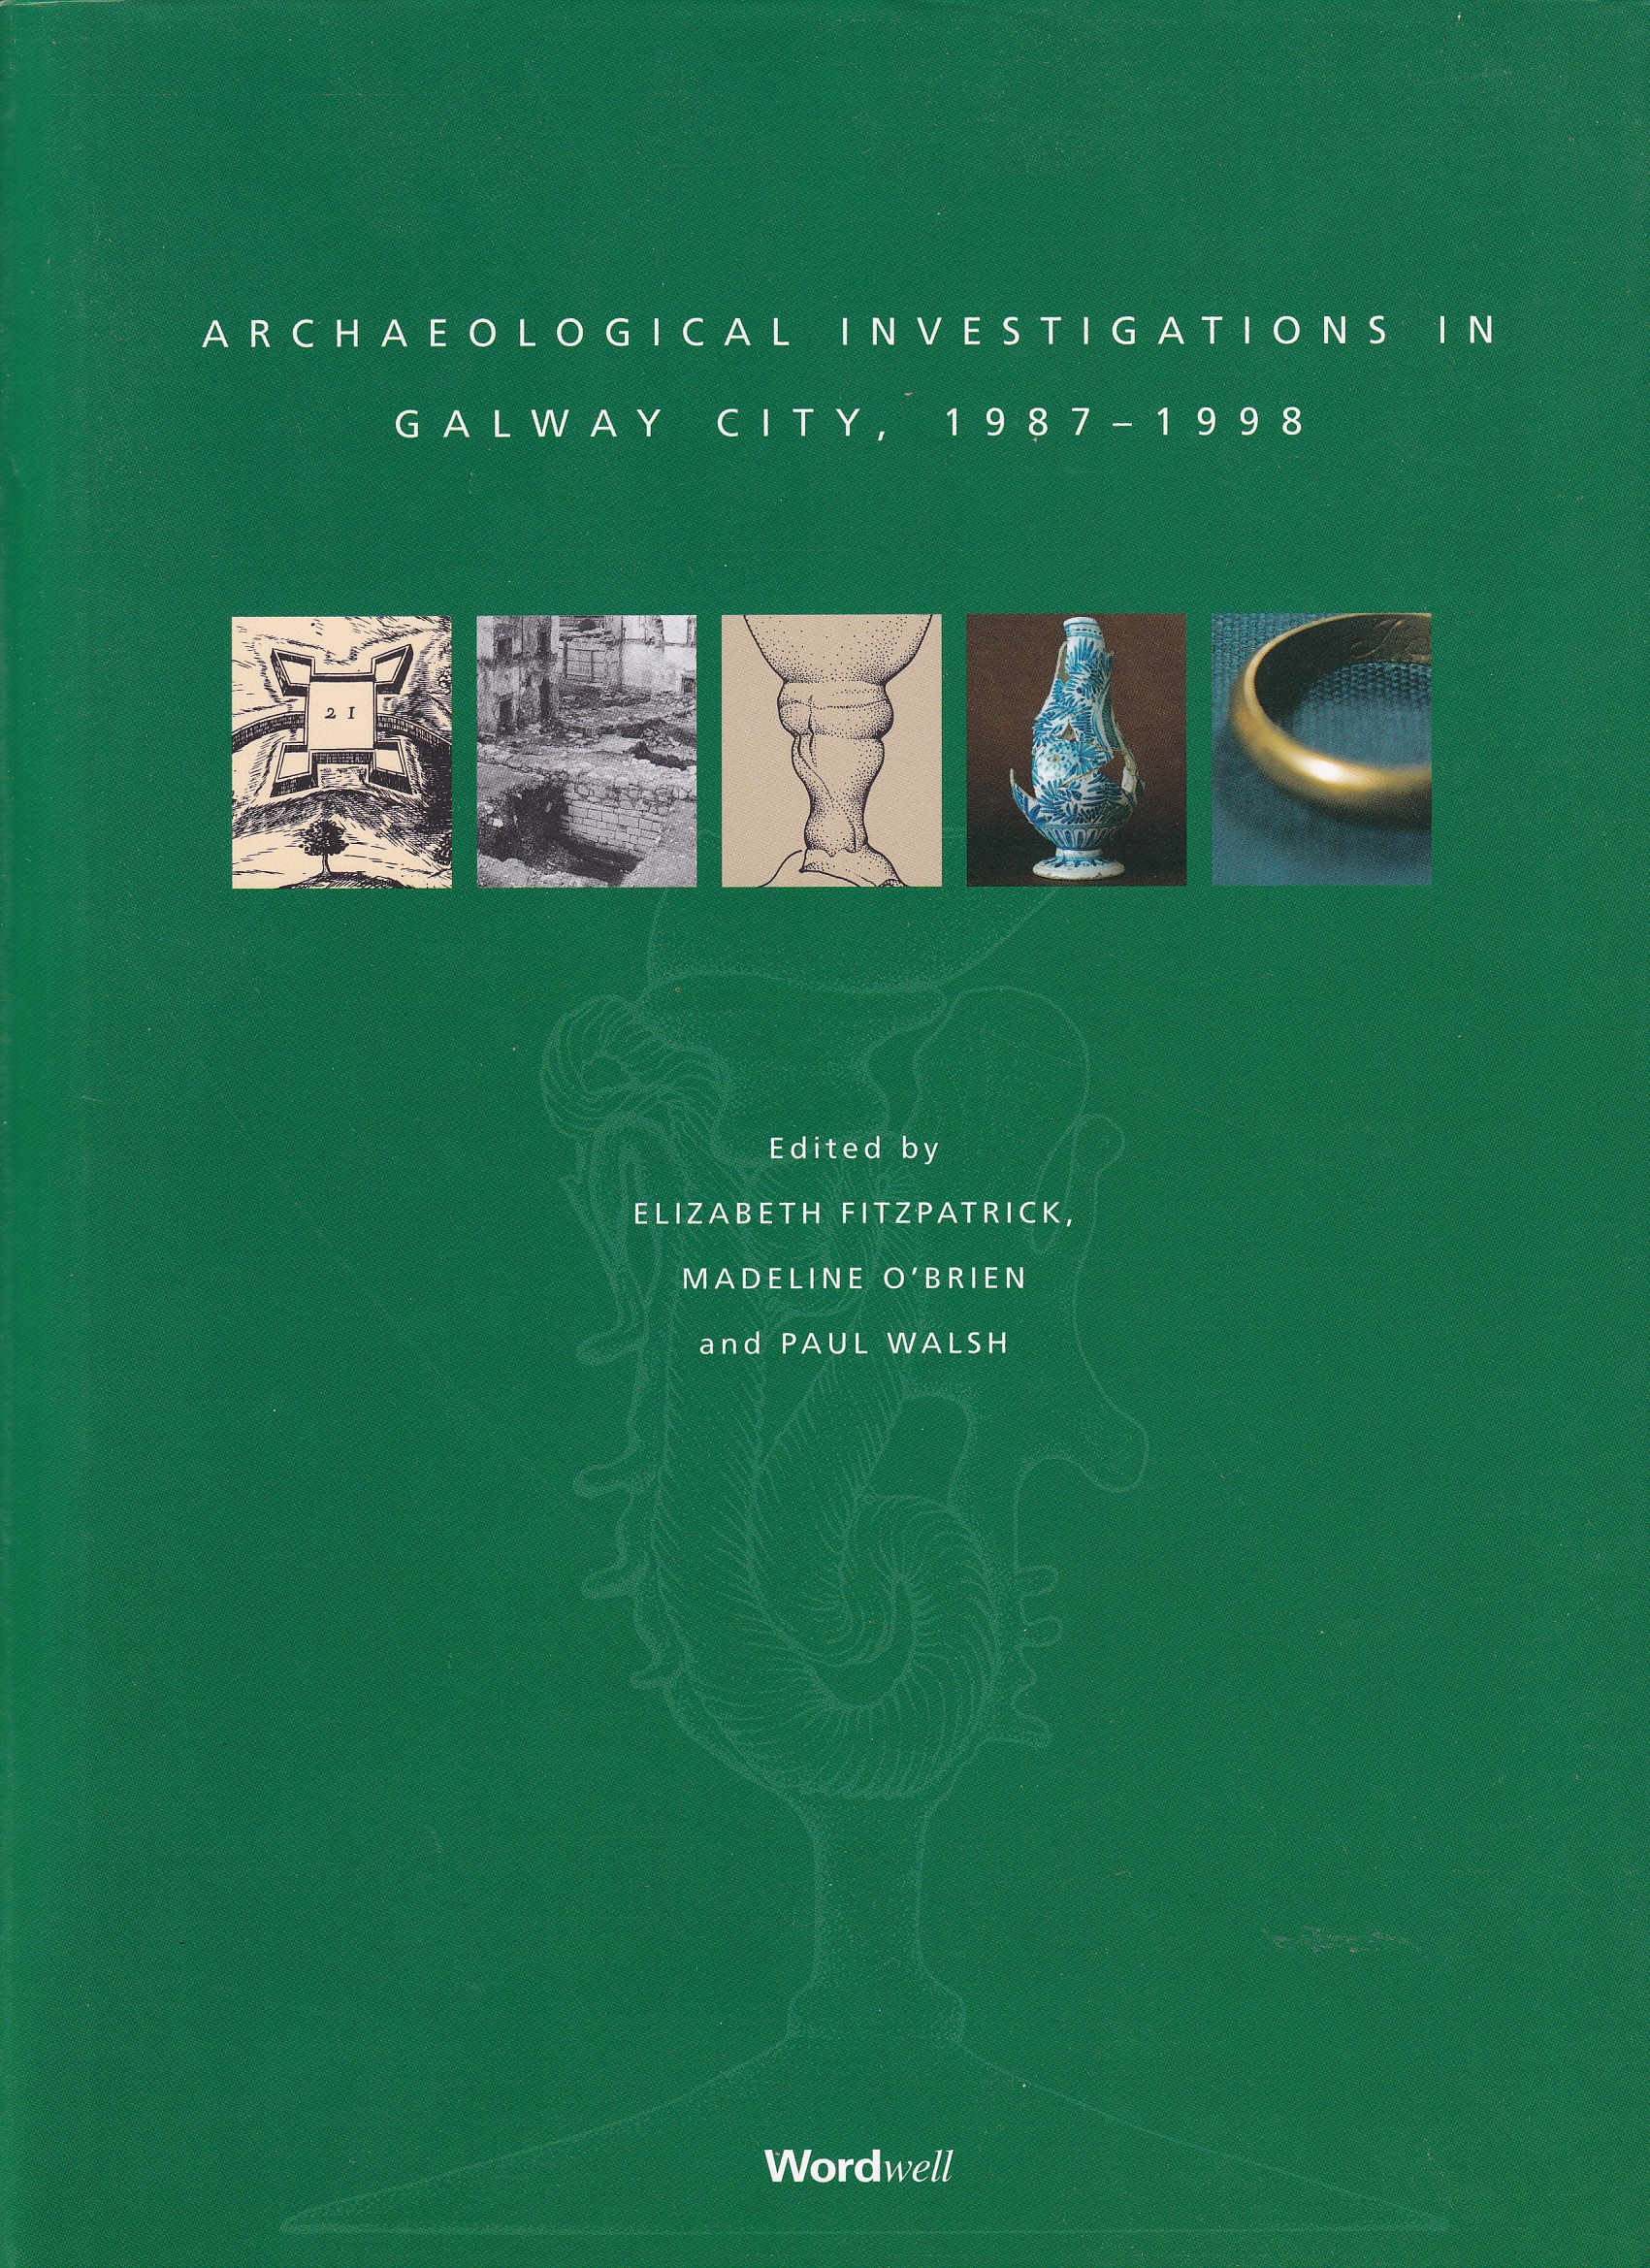 Archaeological Investigations in Galway City, 1987-1998 (Limited Edition) by Elizabeth Fitzpatrick, Madeline O Brien, Paul Walsh eds